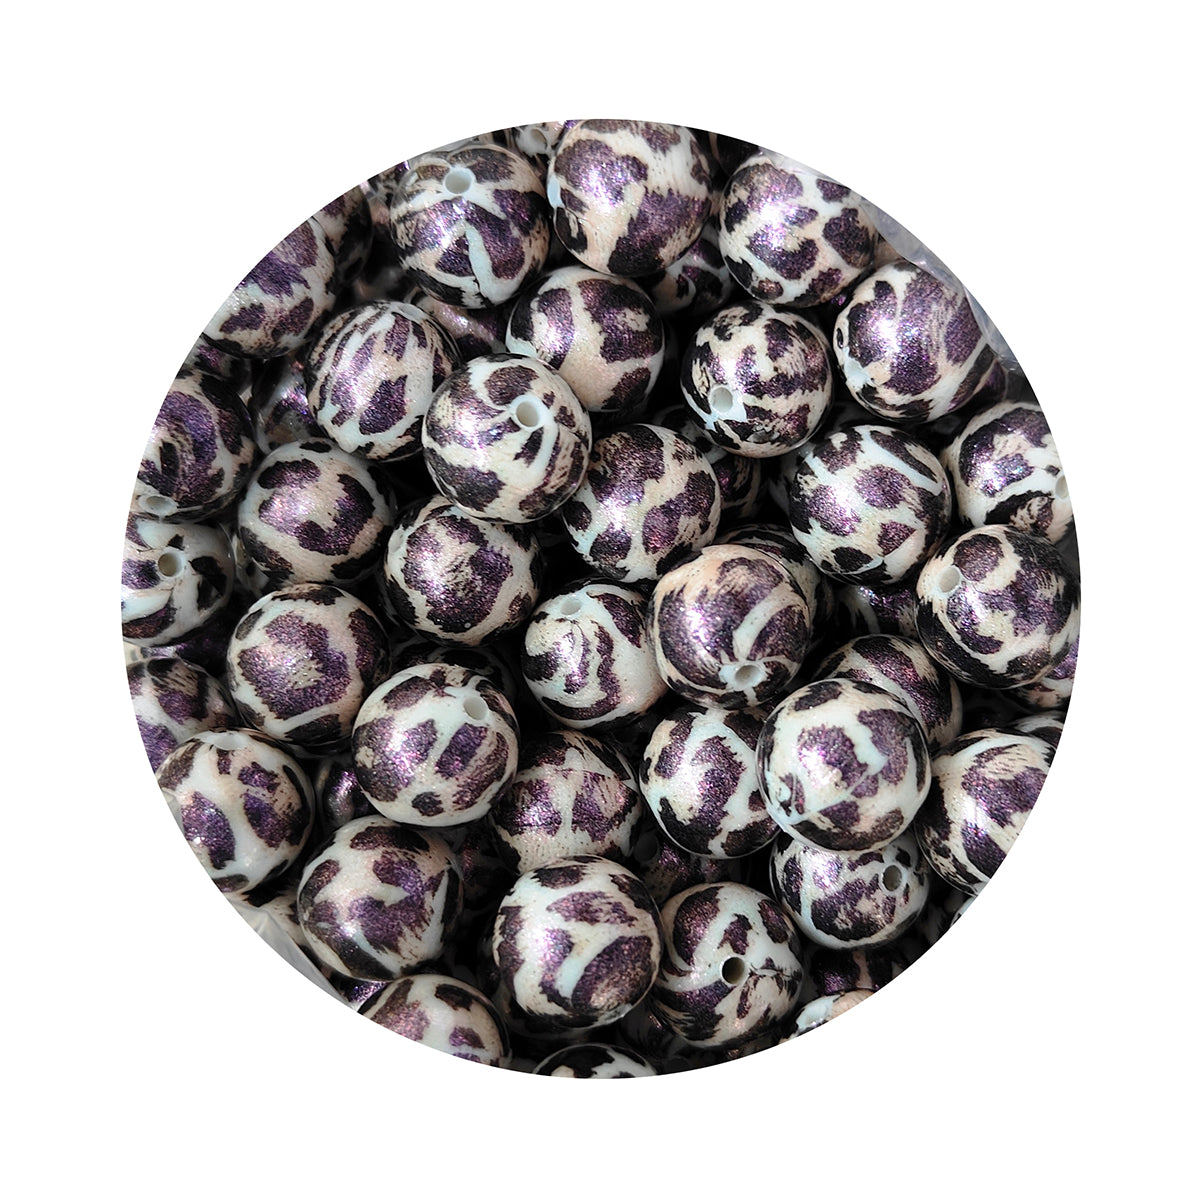 15mm Black Silicone Beads, Black Round Silicone Beads, Beads Wholesale 